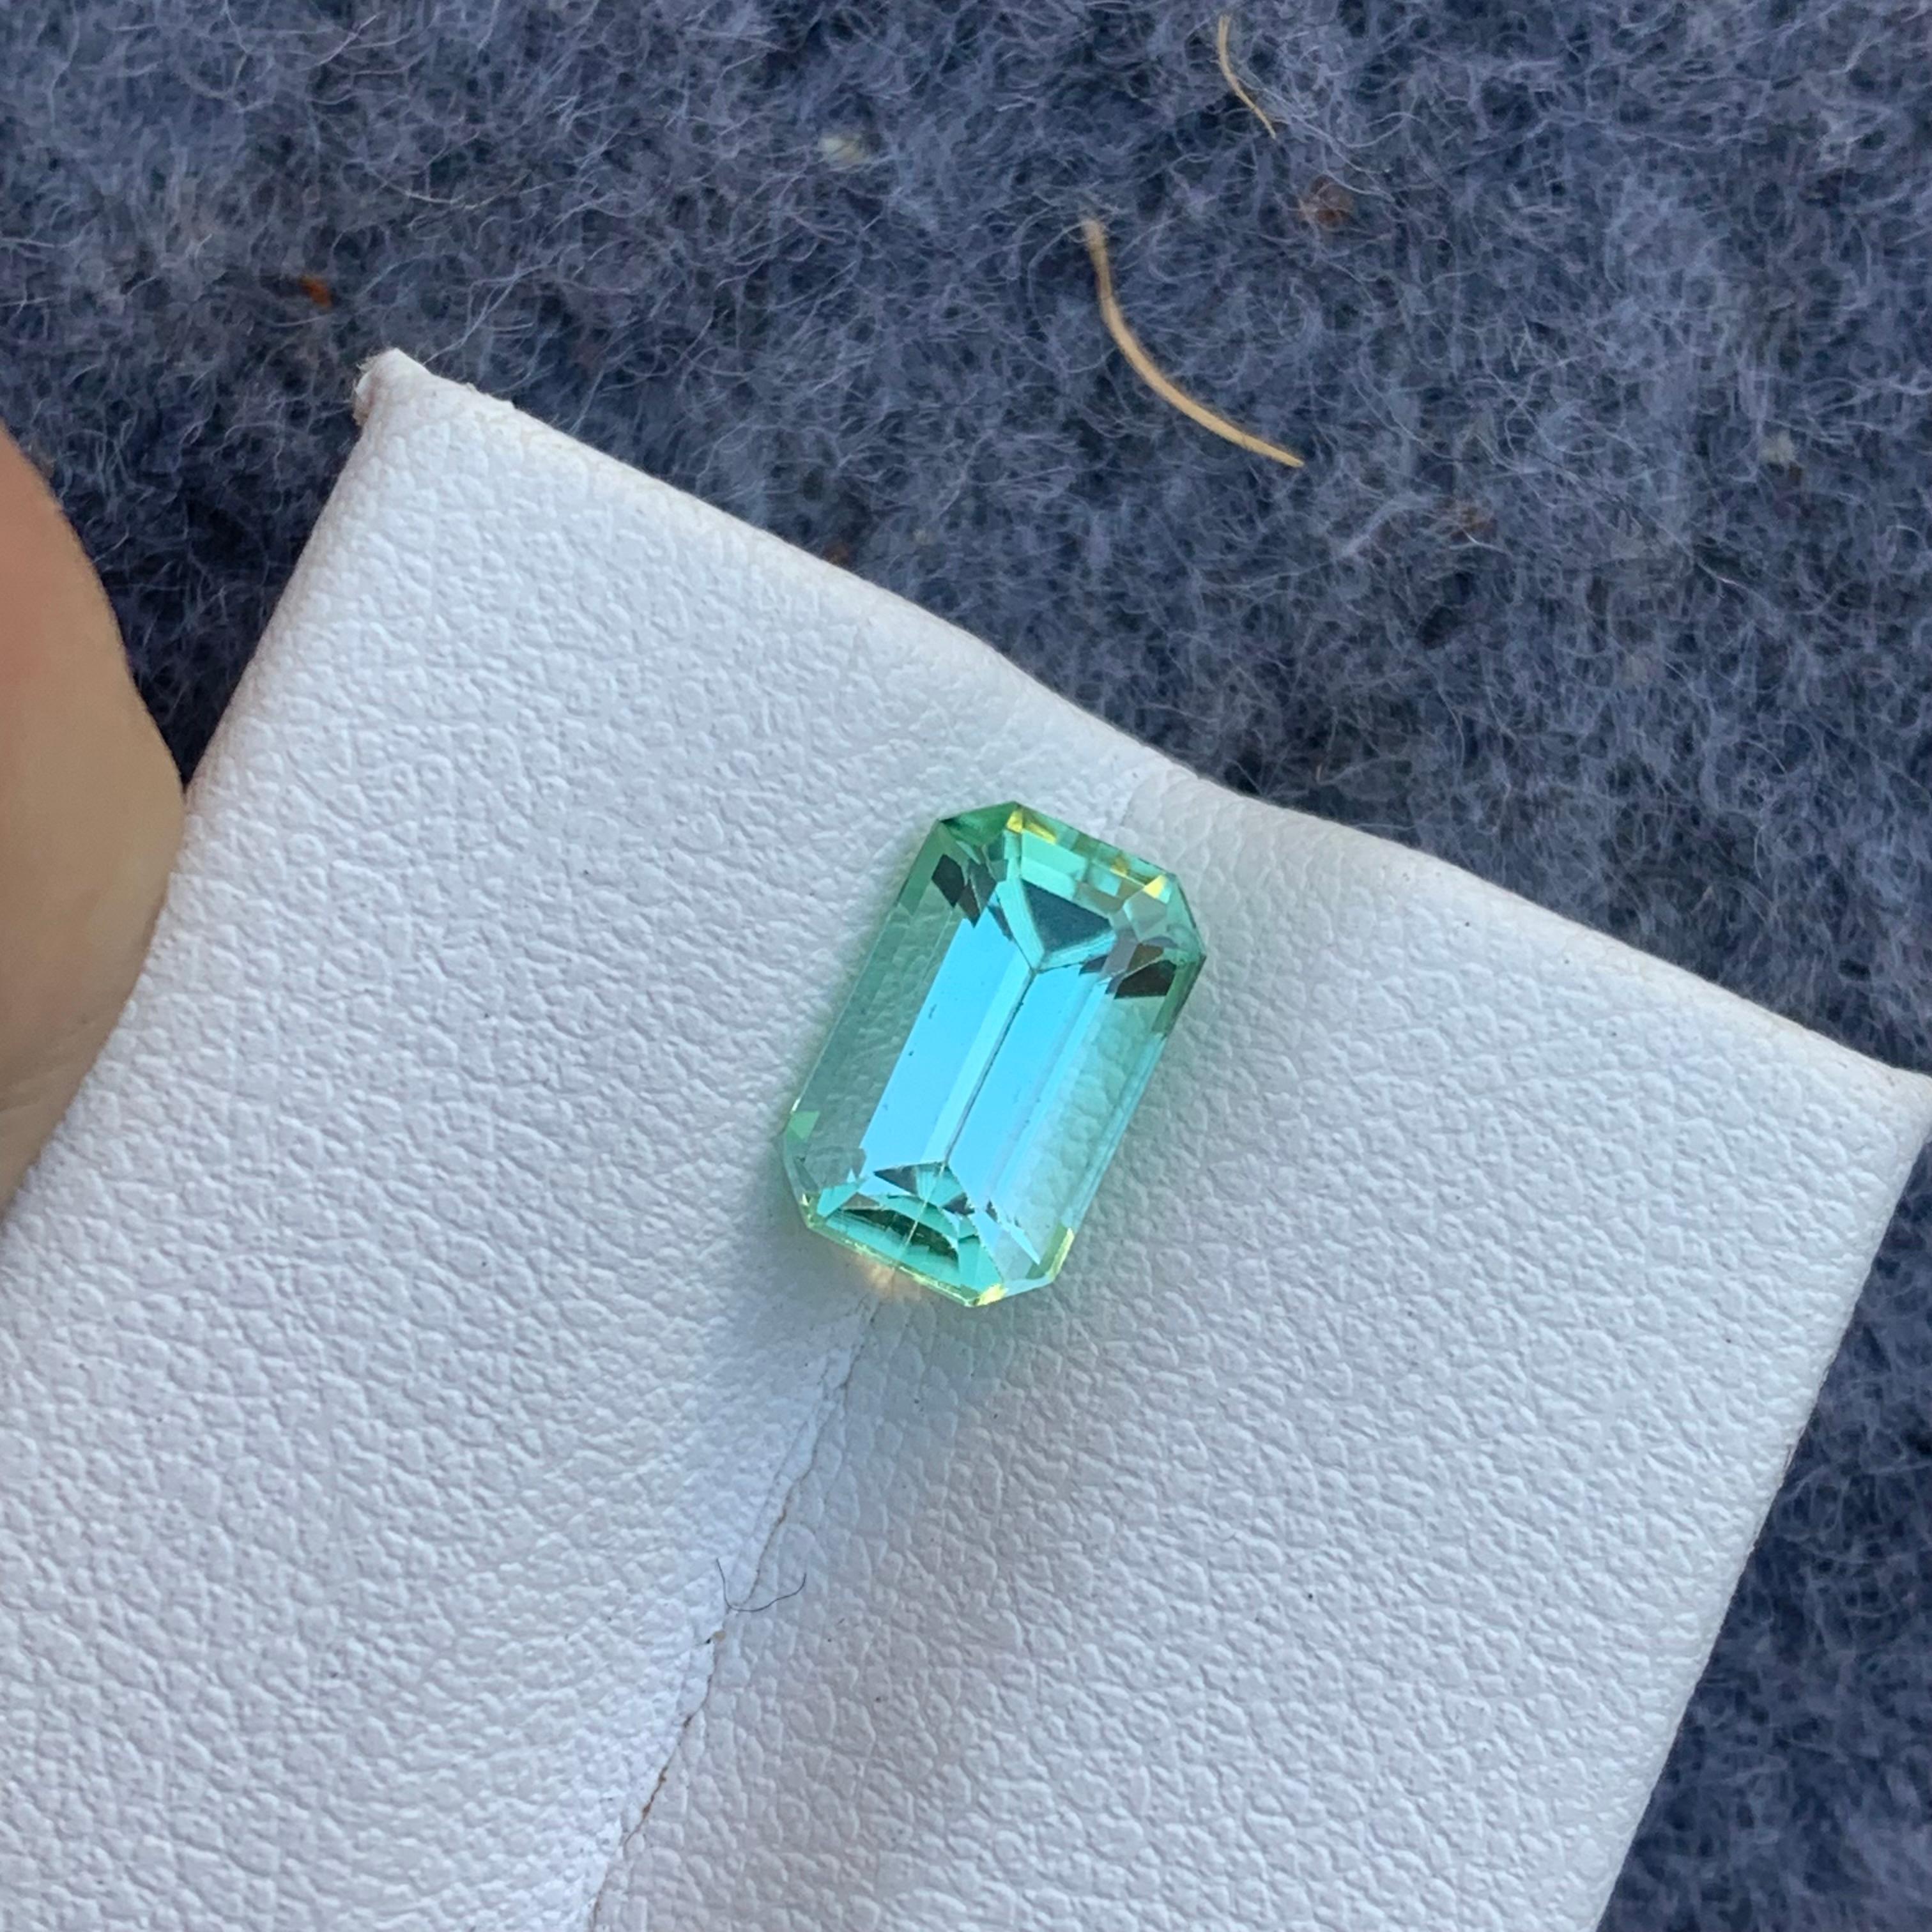 Gorgeous Loose Indicolite Tourmaline 
Weight: 2.15 Carats 
Dimension: 9.2x5.8x4.8 Mm
Origin; Kunar Afghanistan Mine
Color: Mint
Shape: Emerald 
Treatment: Non
Certificate: On Demand 
Indicolite tourmalines (tourmalines with blue in them) are rare.